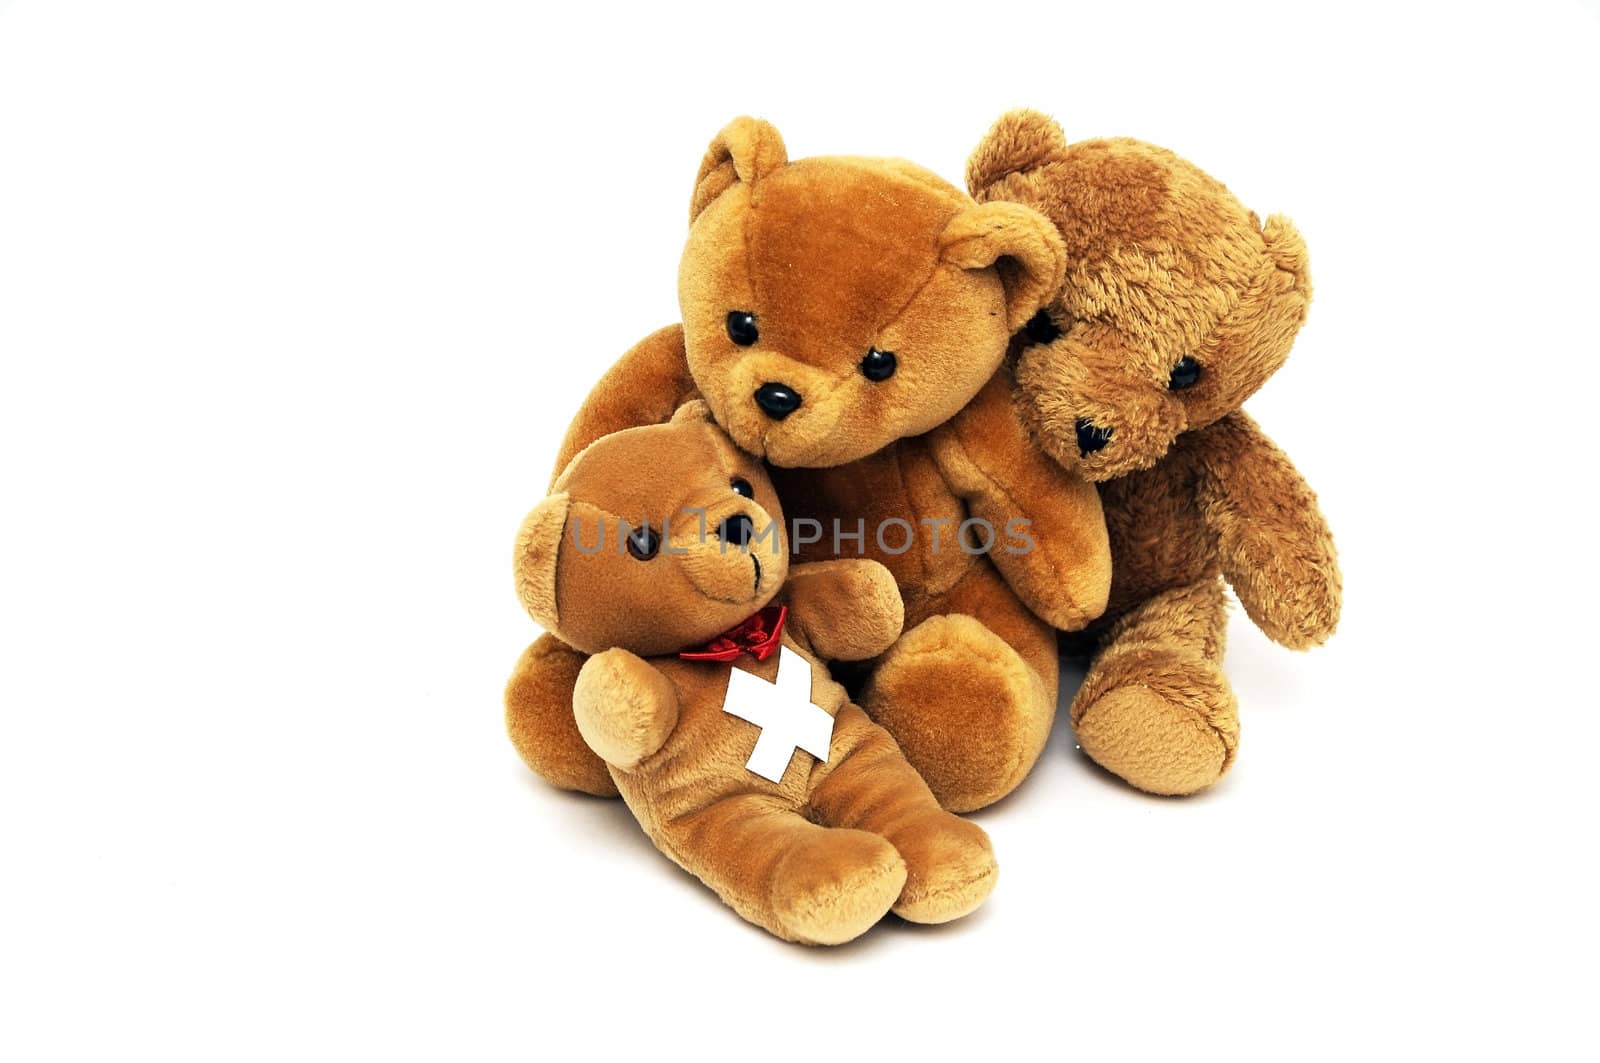 Teddy bears with patch